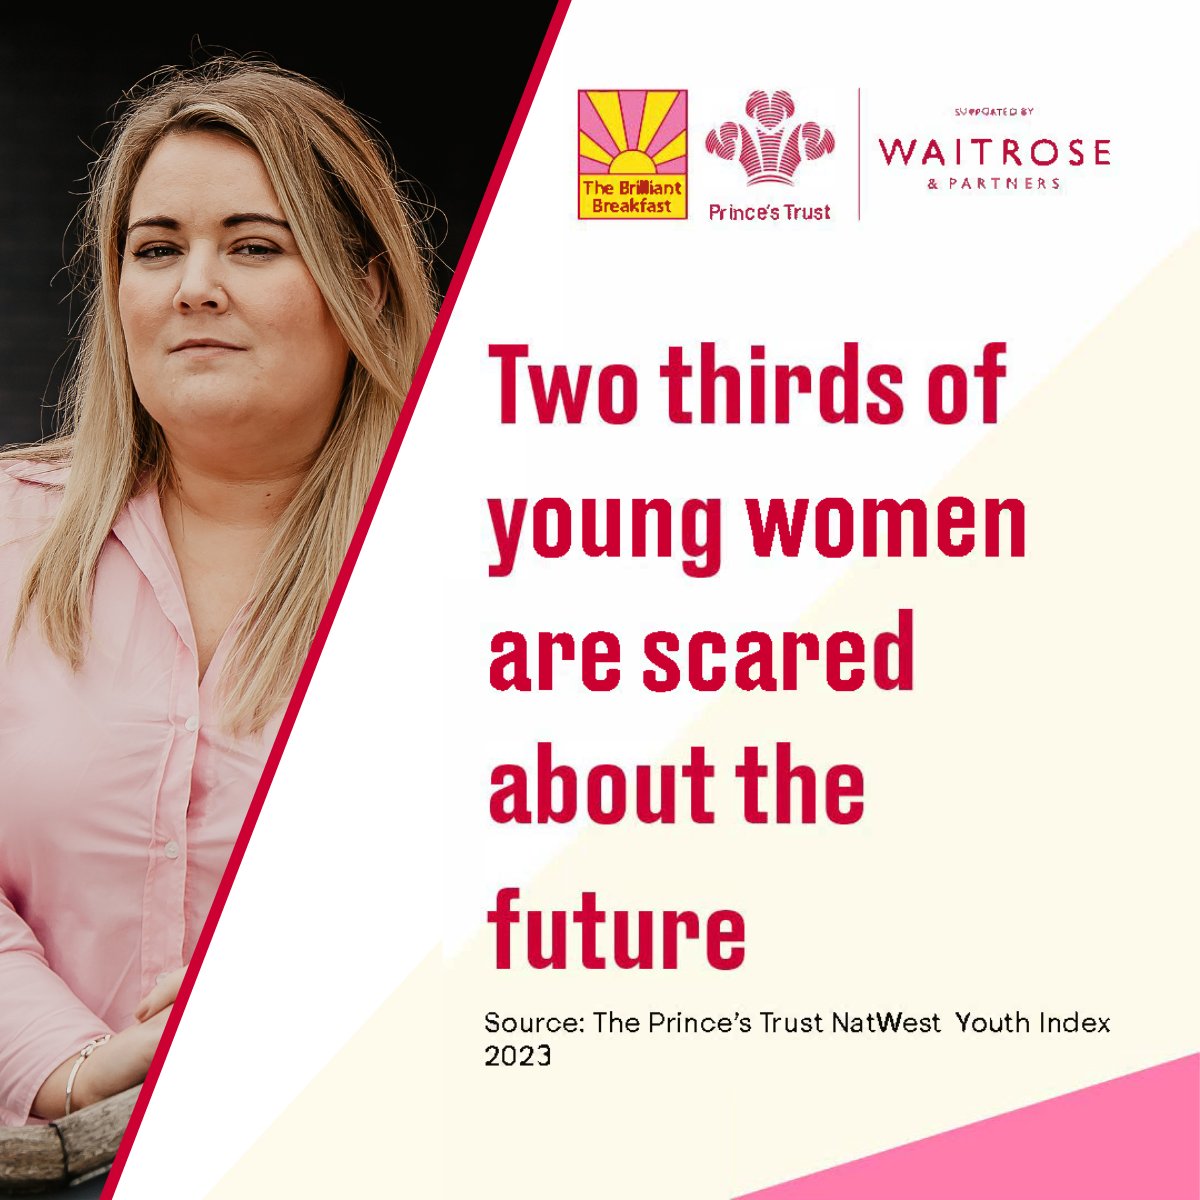 With 68% of young women feeling scared for the future, the need for support has never been greater. By holding a Brilliant Breakfast, you could give a young woman the skills she needs to turn her life around. Register to hold a breakfast 👉 bit.ly/3OnOQEJ